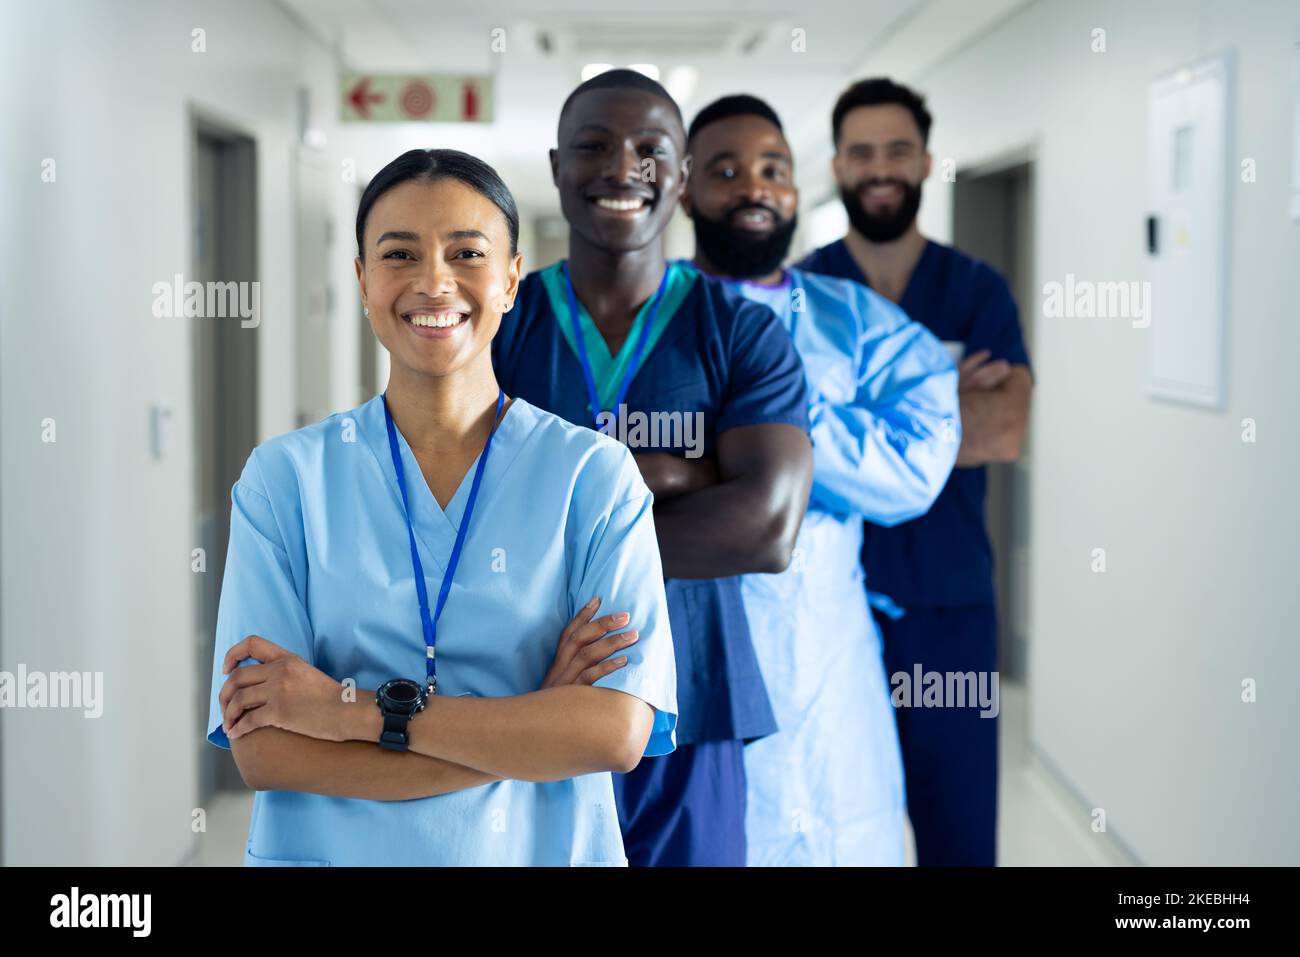 Portrait of diverse group of smiling healthcare workers standing in line in hospital corridor Stock Photo